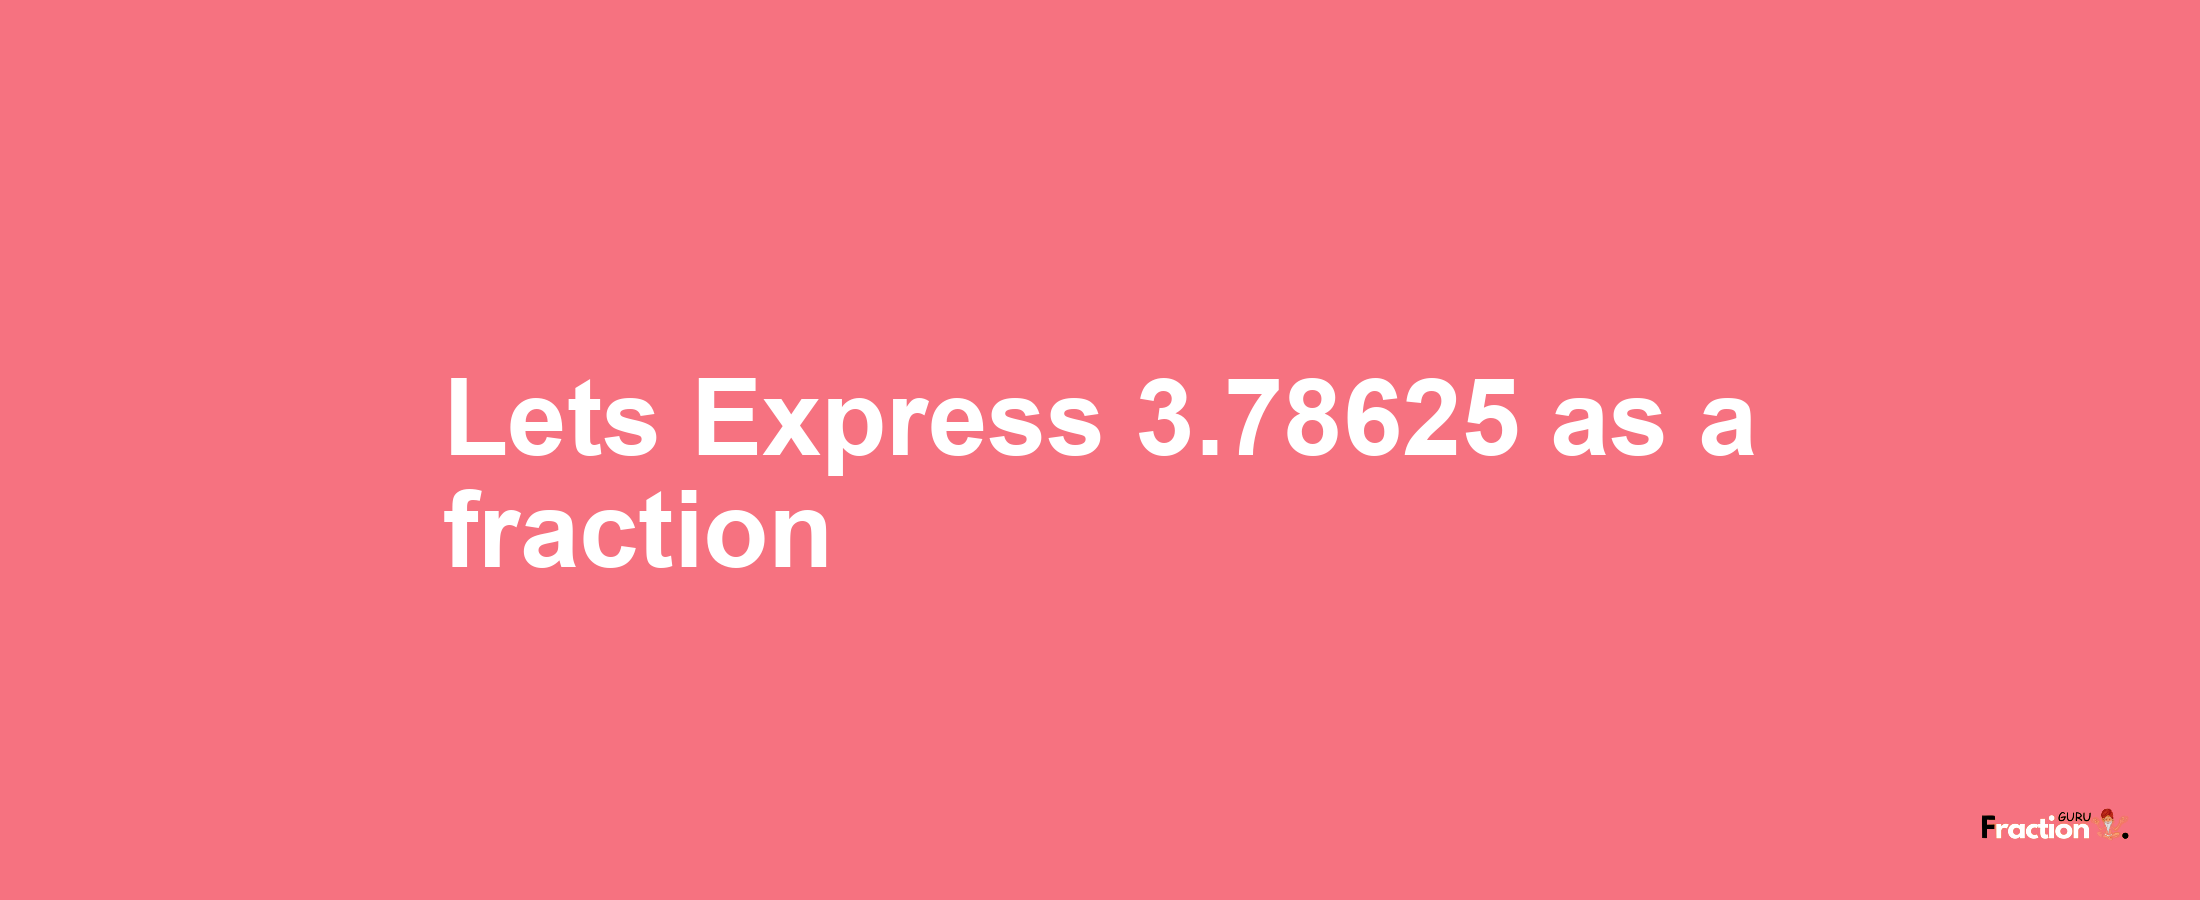 Lets Express 3.78625 as afraction